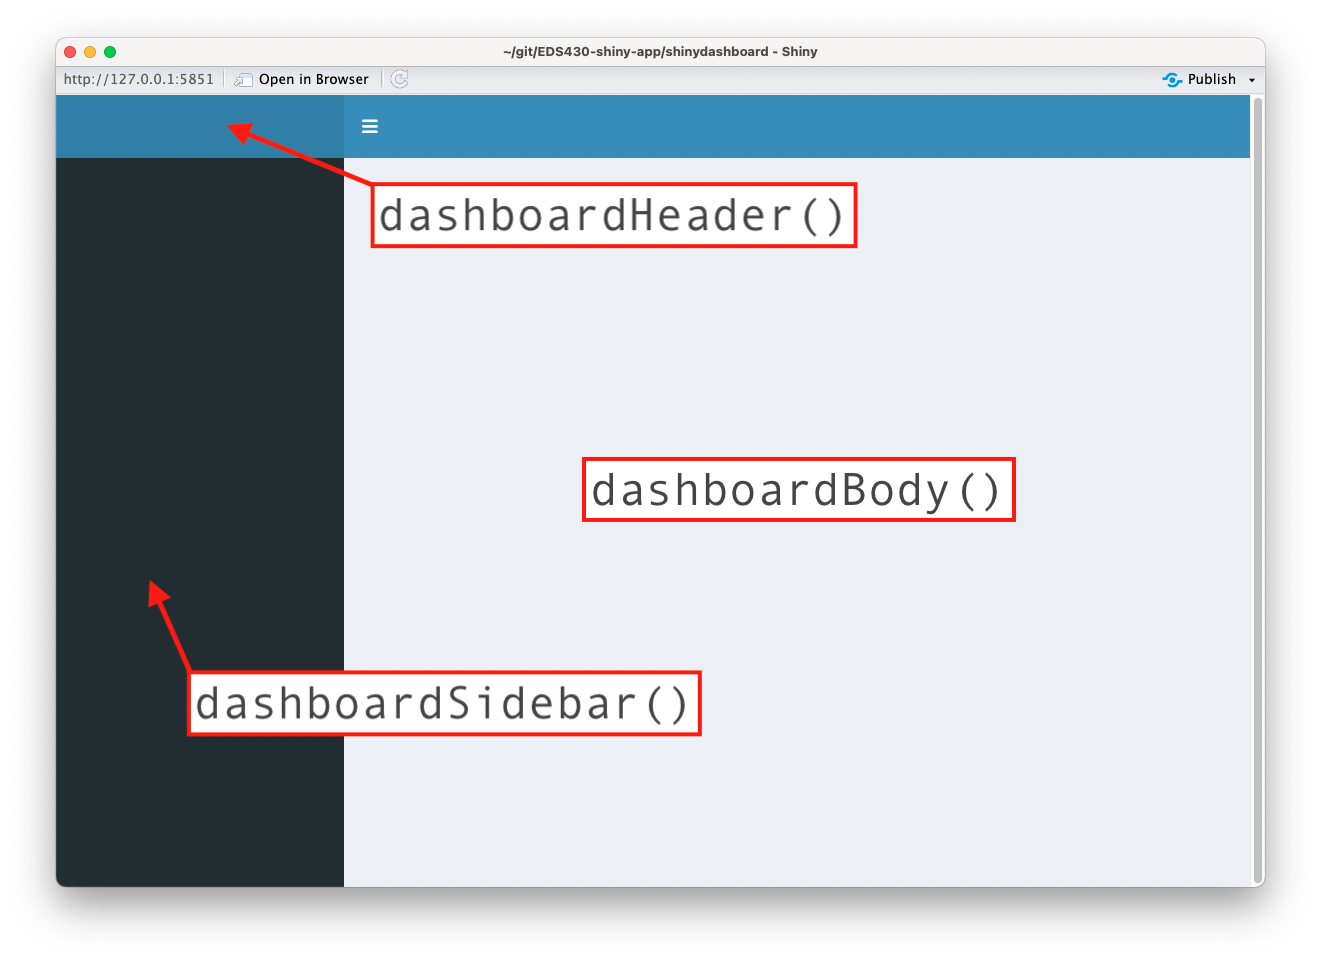 The most basic shinydashboard UI, with the default coloring -- a dashboardHeader in light blue, a dashboardSidebar in dark blue, and a dashboardBody in off-white.